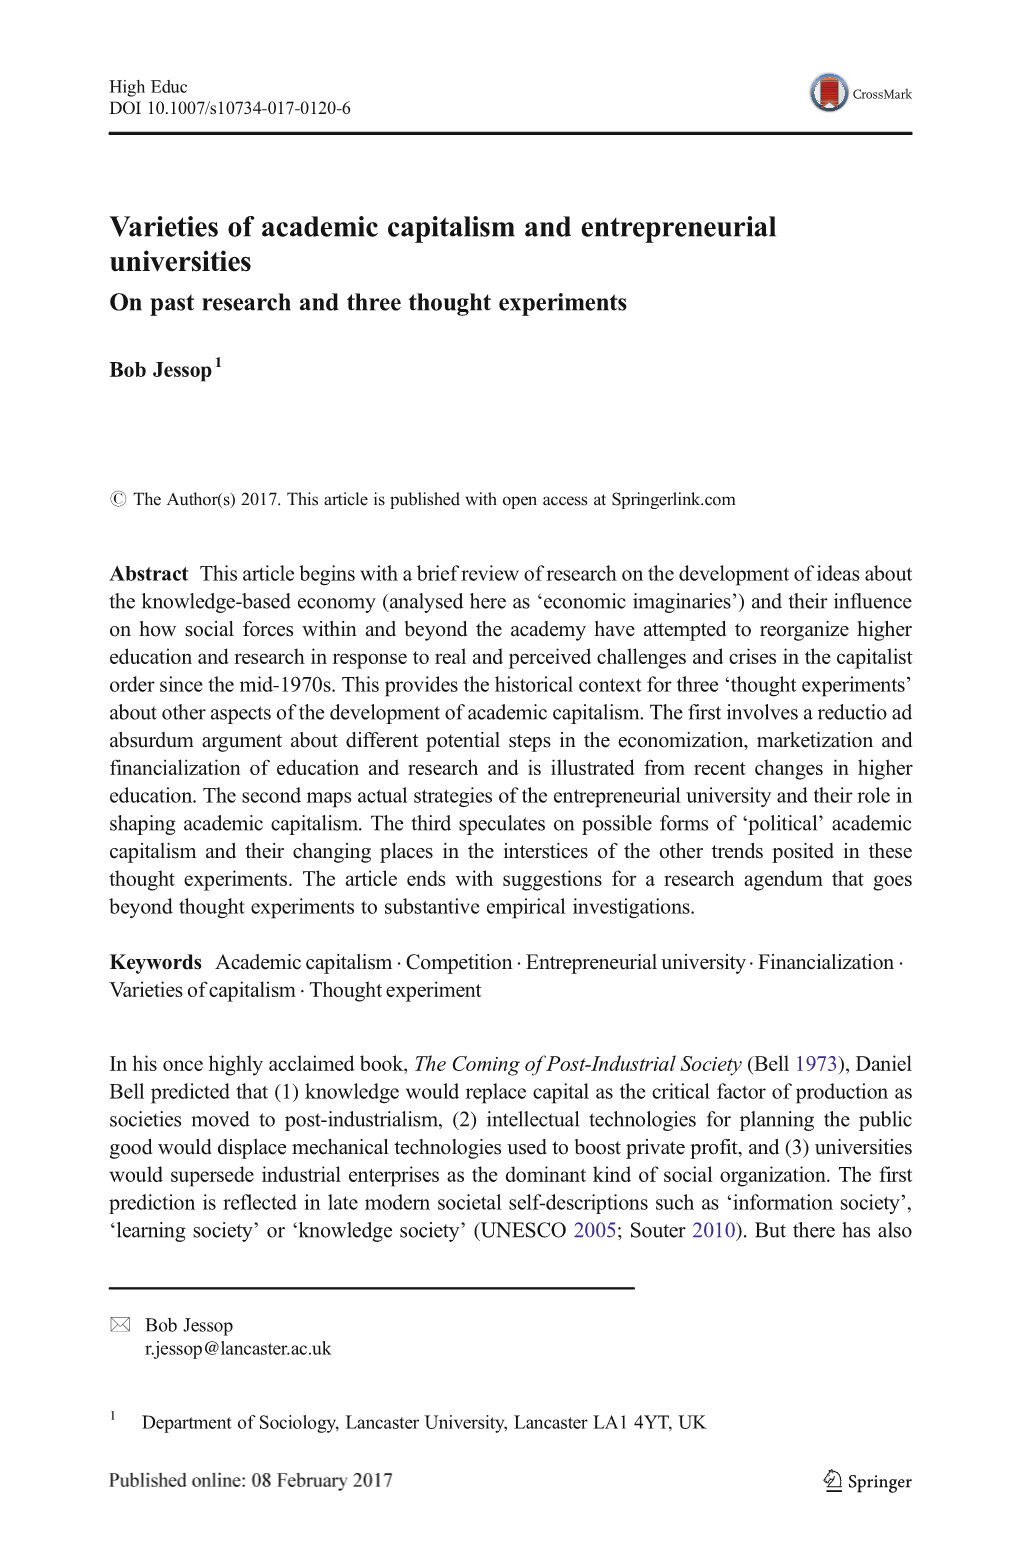 Varieties of Academic Capitalism and Entrepreneurial Universities on Past Research and Three Thought Experiments